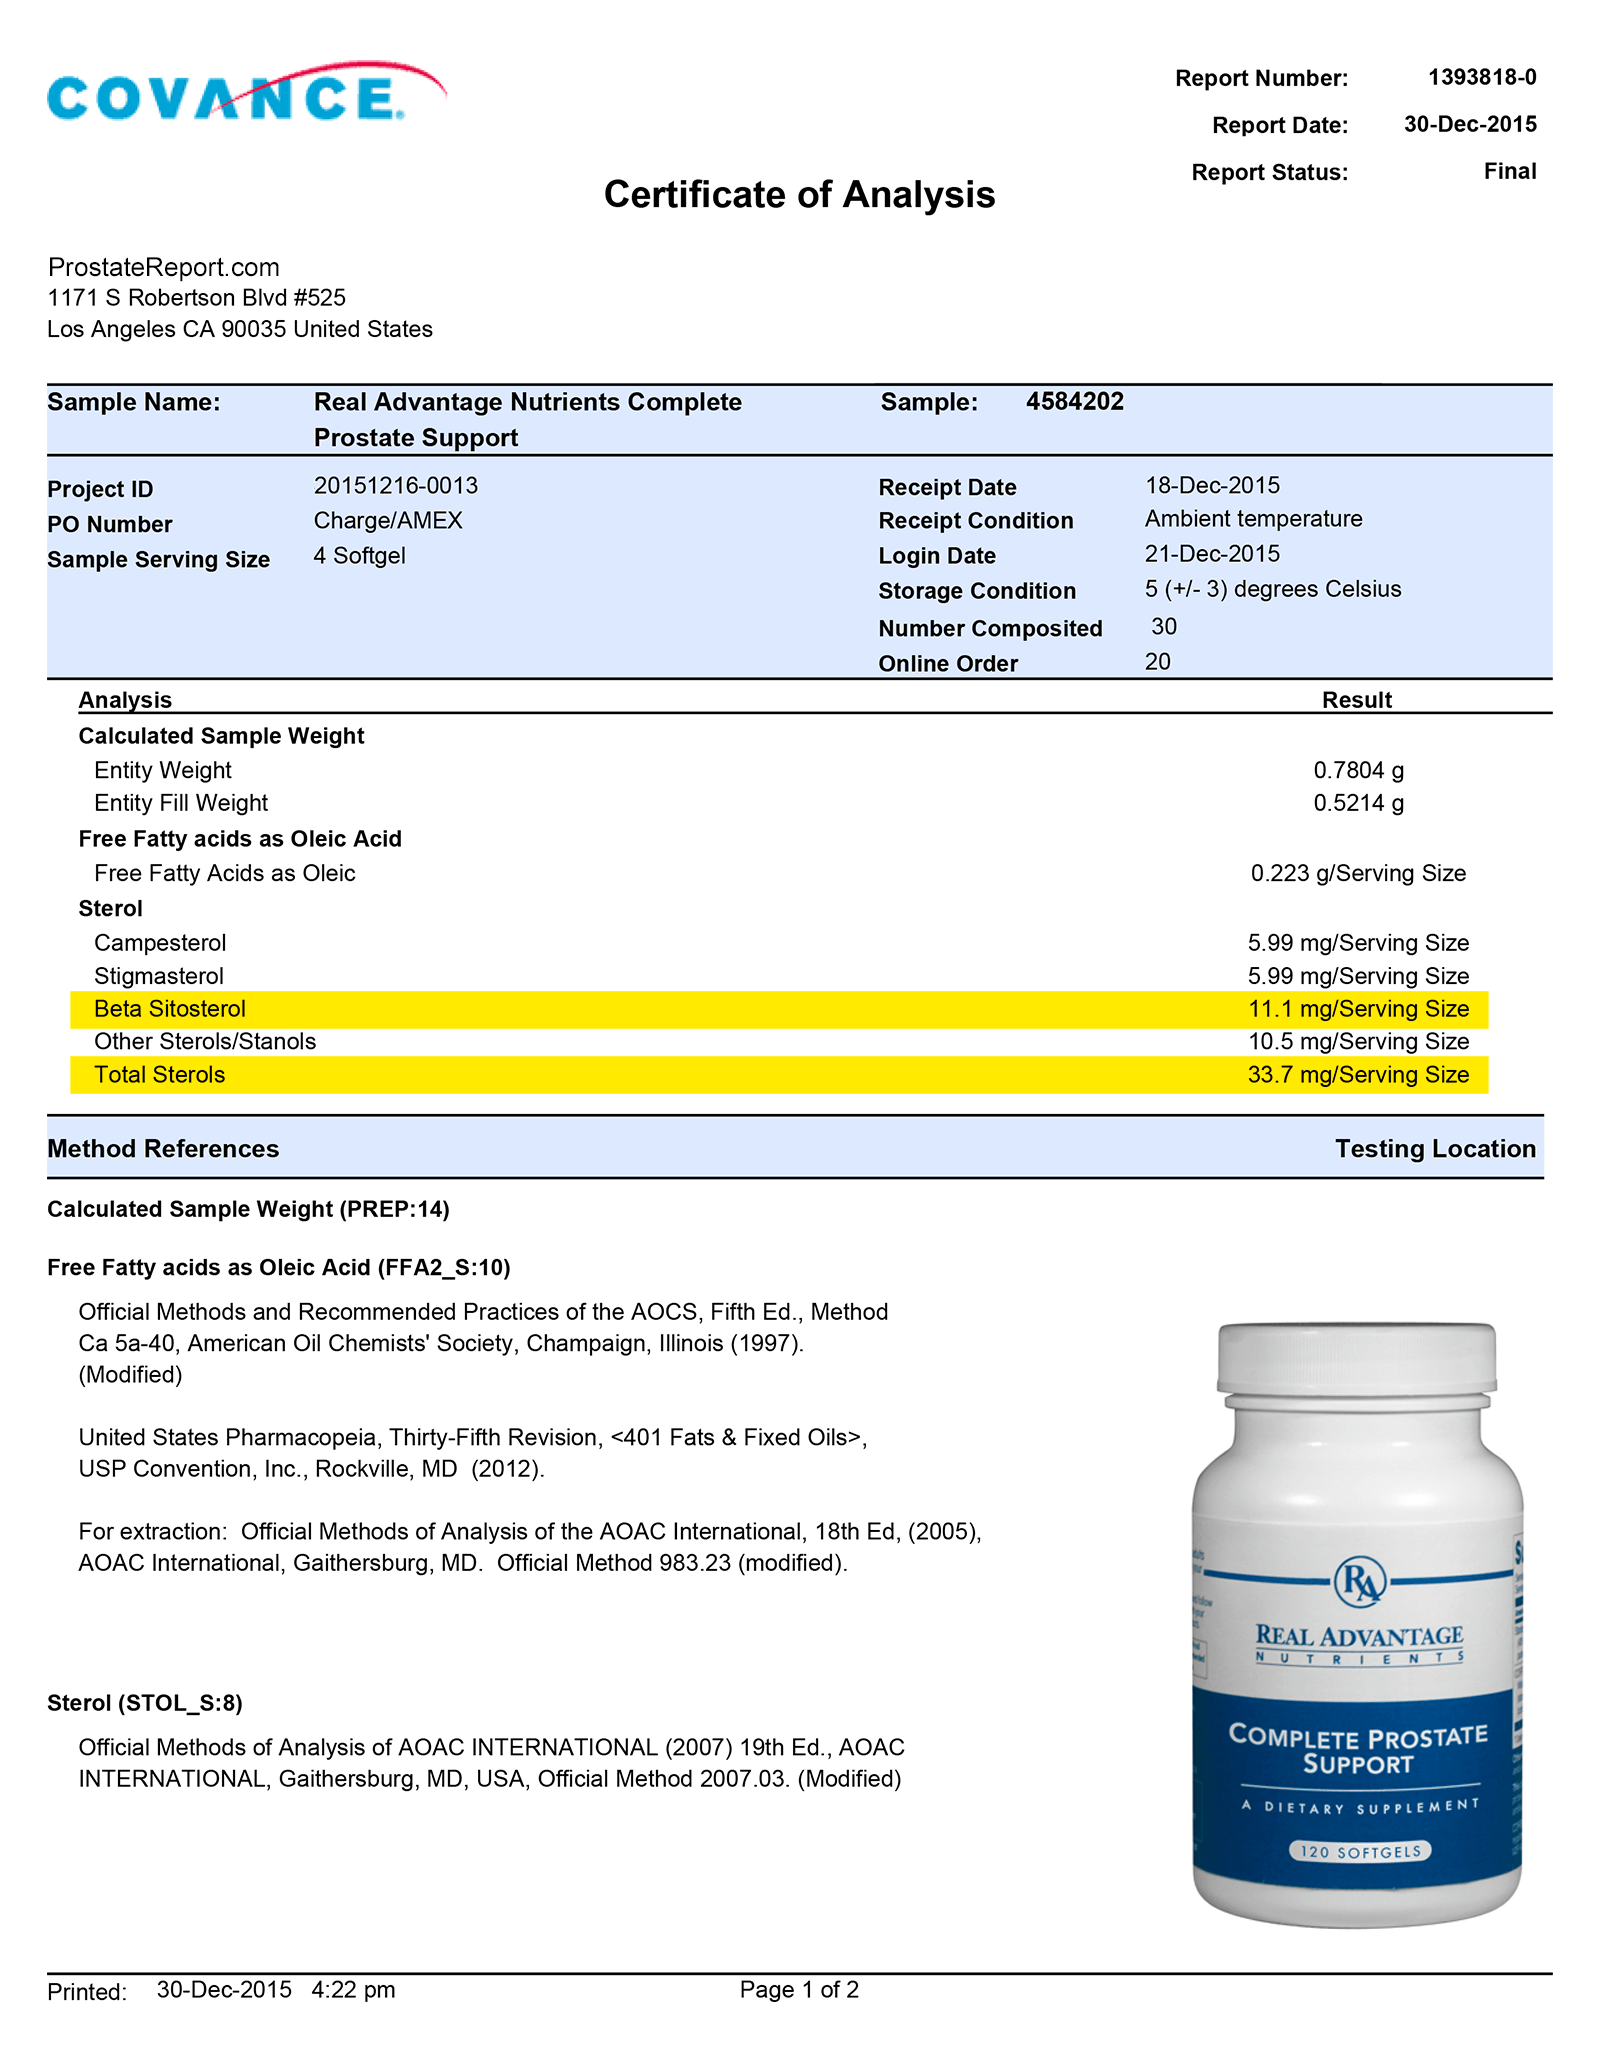 Complete Prostate Support lab report 